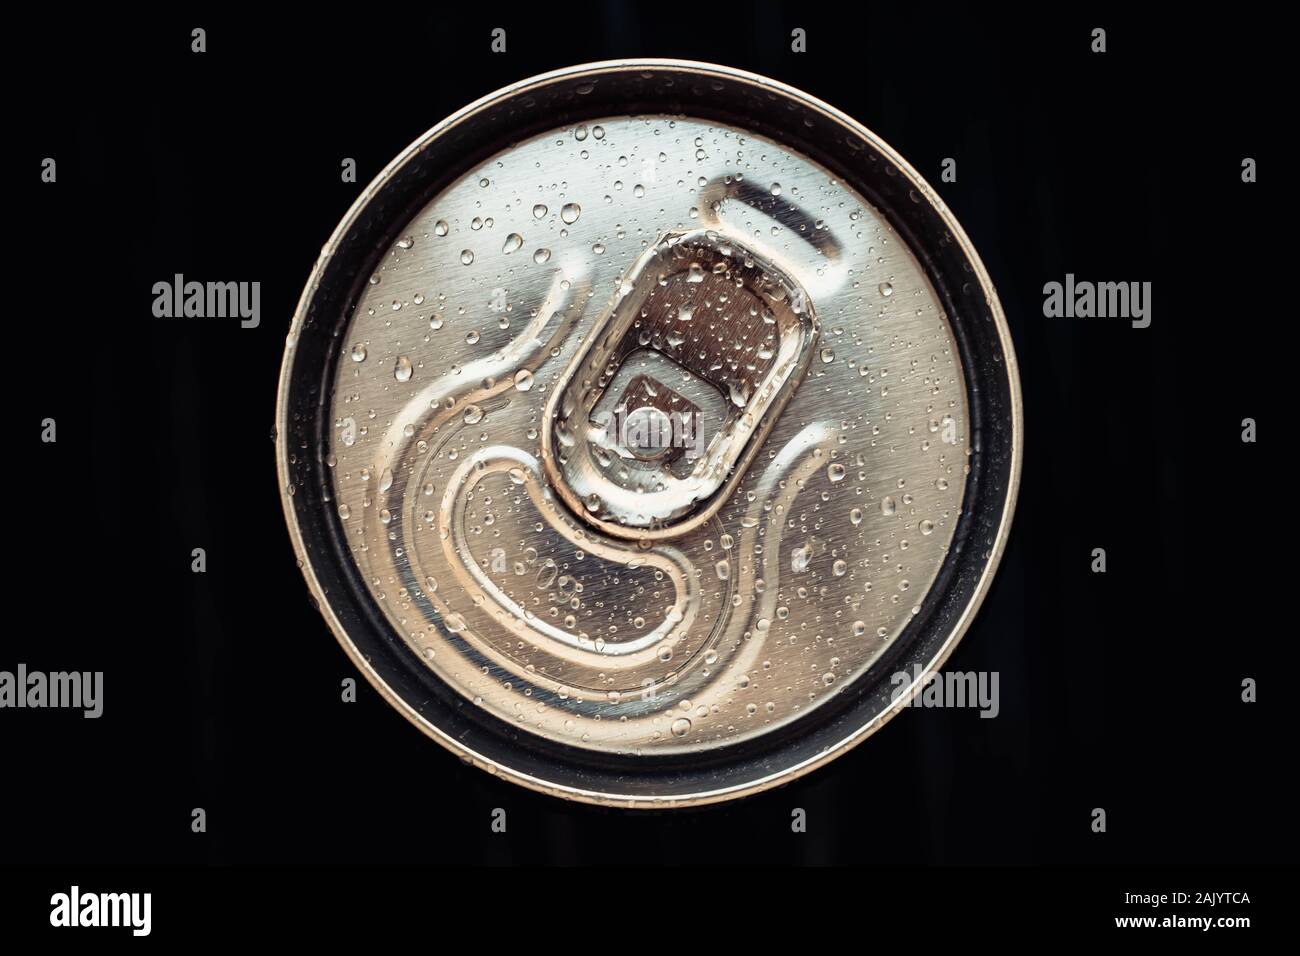 Shiny metal cola can lid with water drops on black background. Golden bottle of drink, lid of packaging of beer. Top view Stock Photo